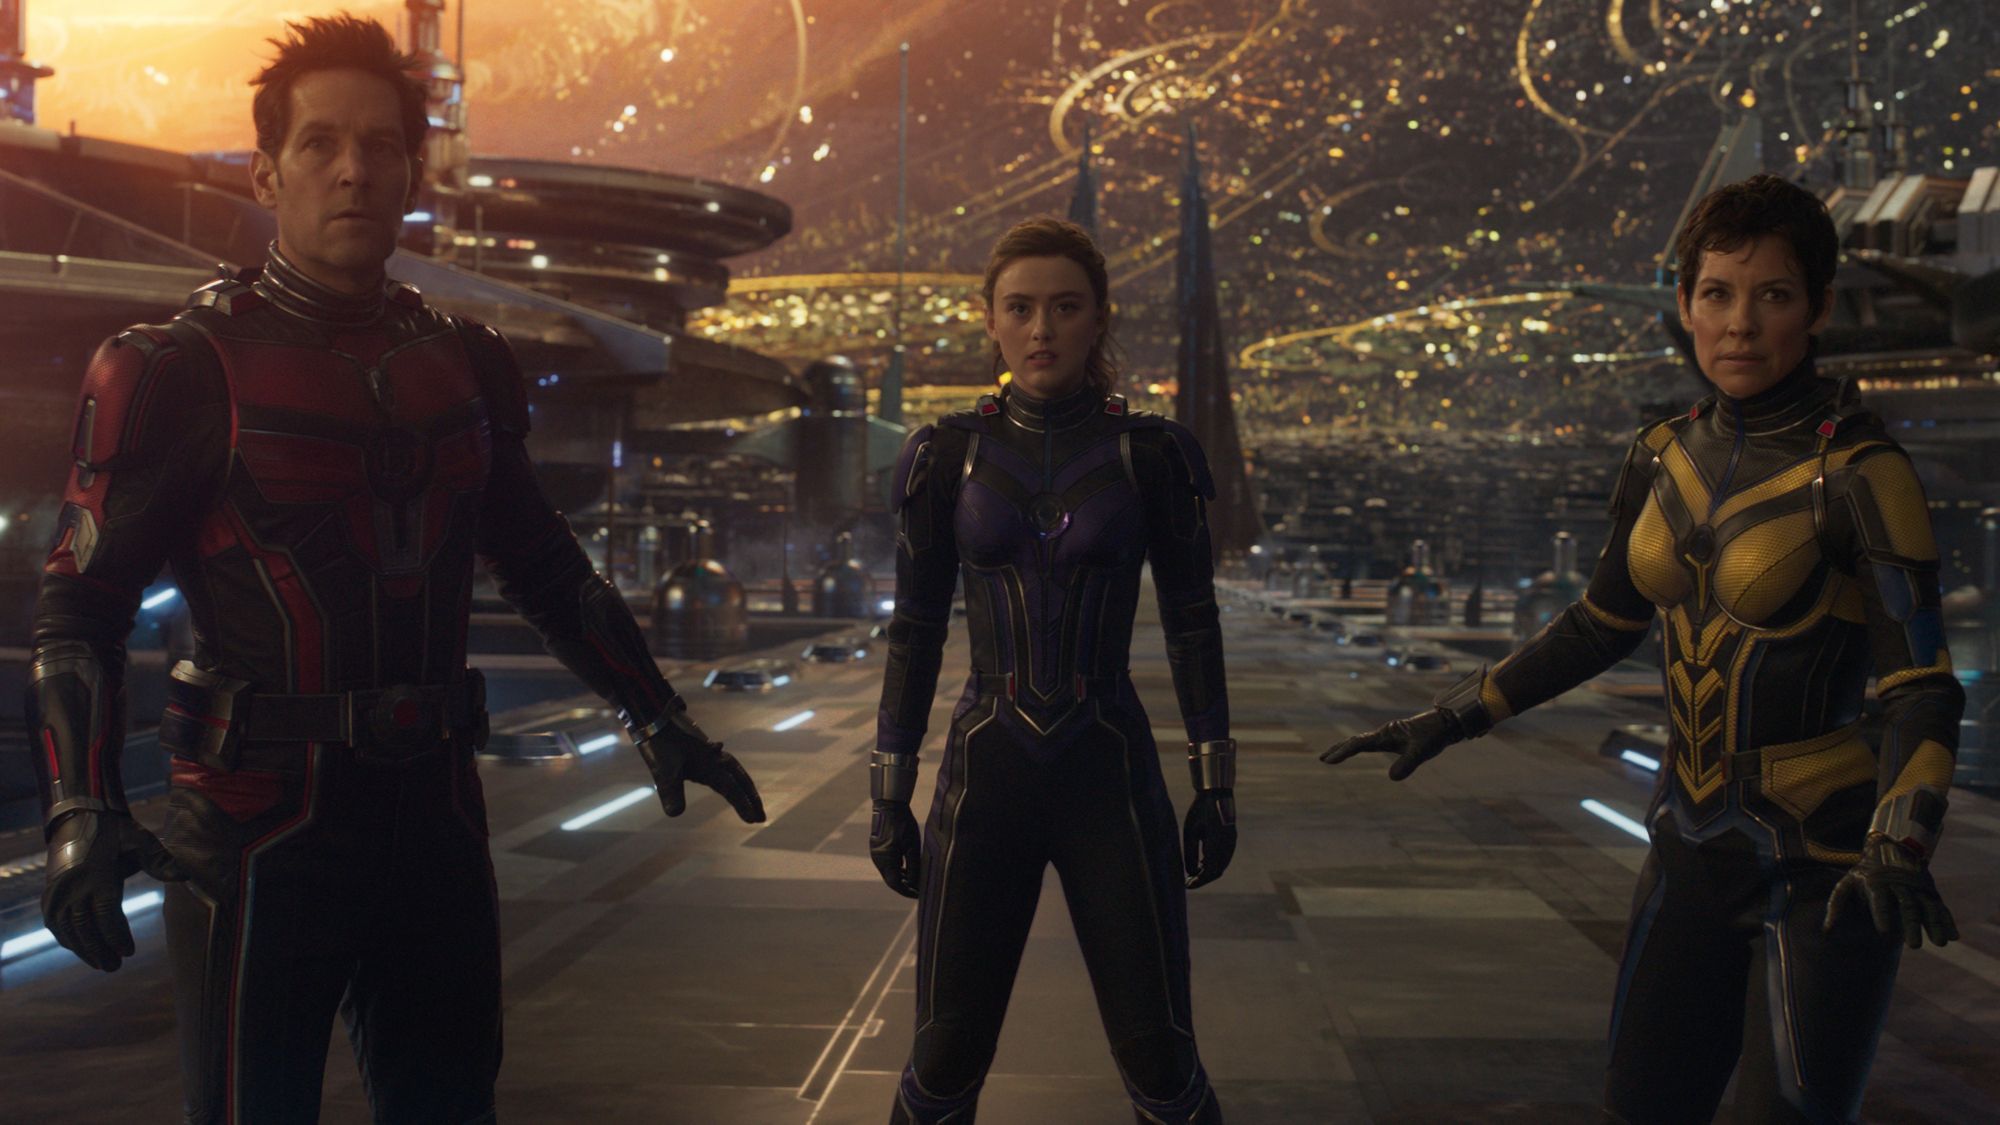 Paul Rudd, Kathryn Newton und Evangeline Lilly in "Marvel Studios' ANT-MAN AND THE WASP: QUANTUMANIA"